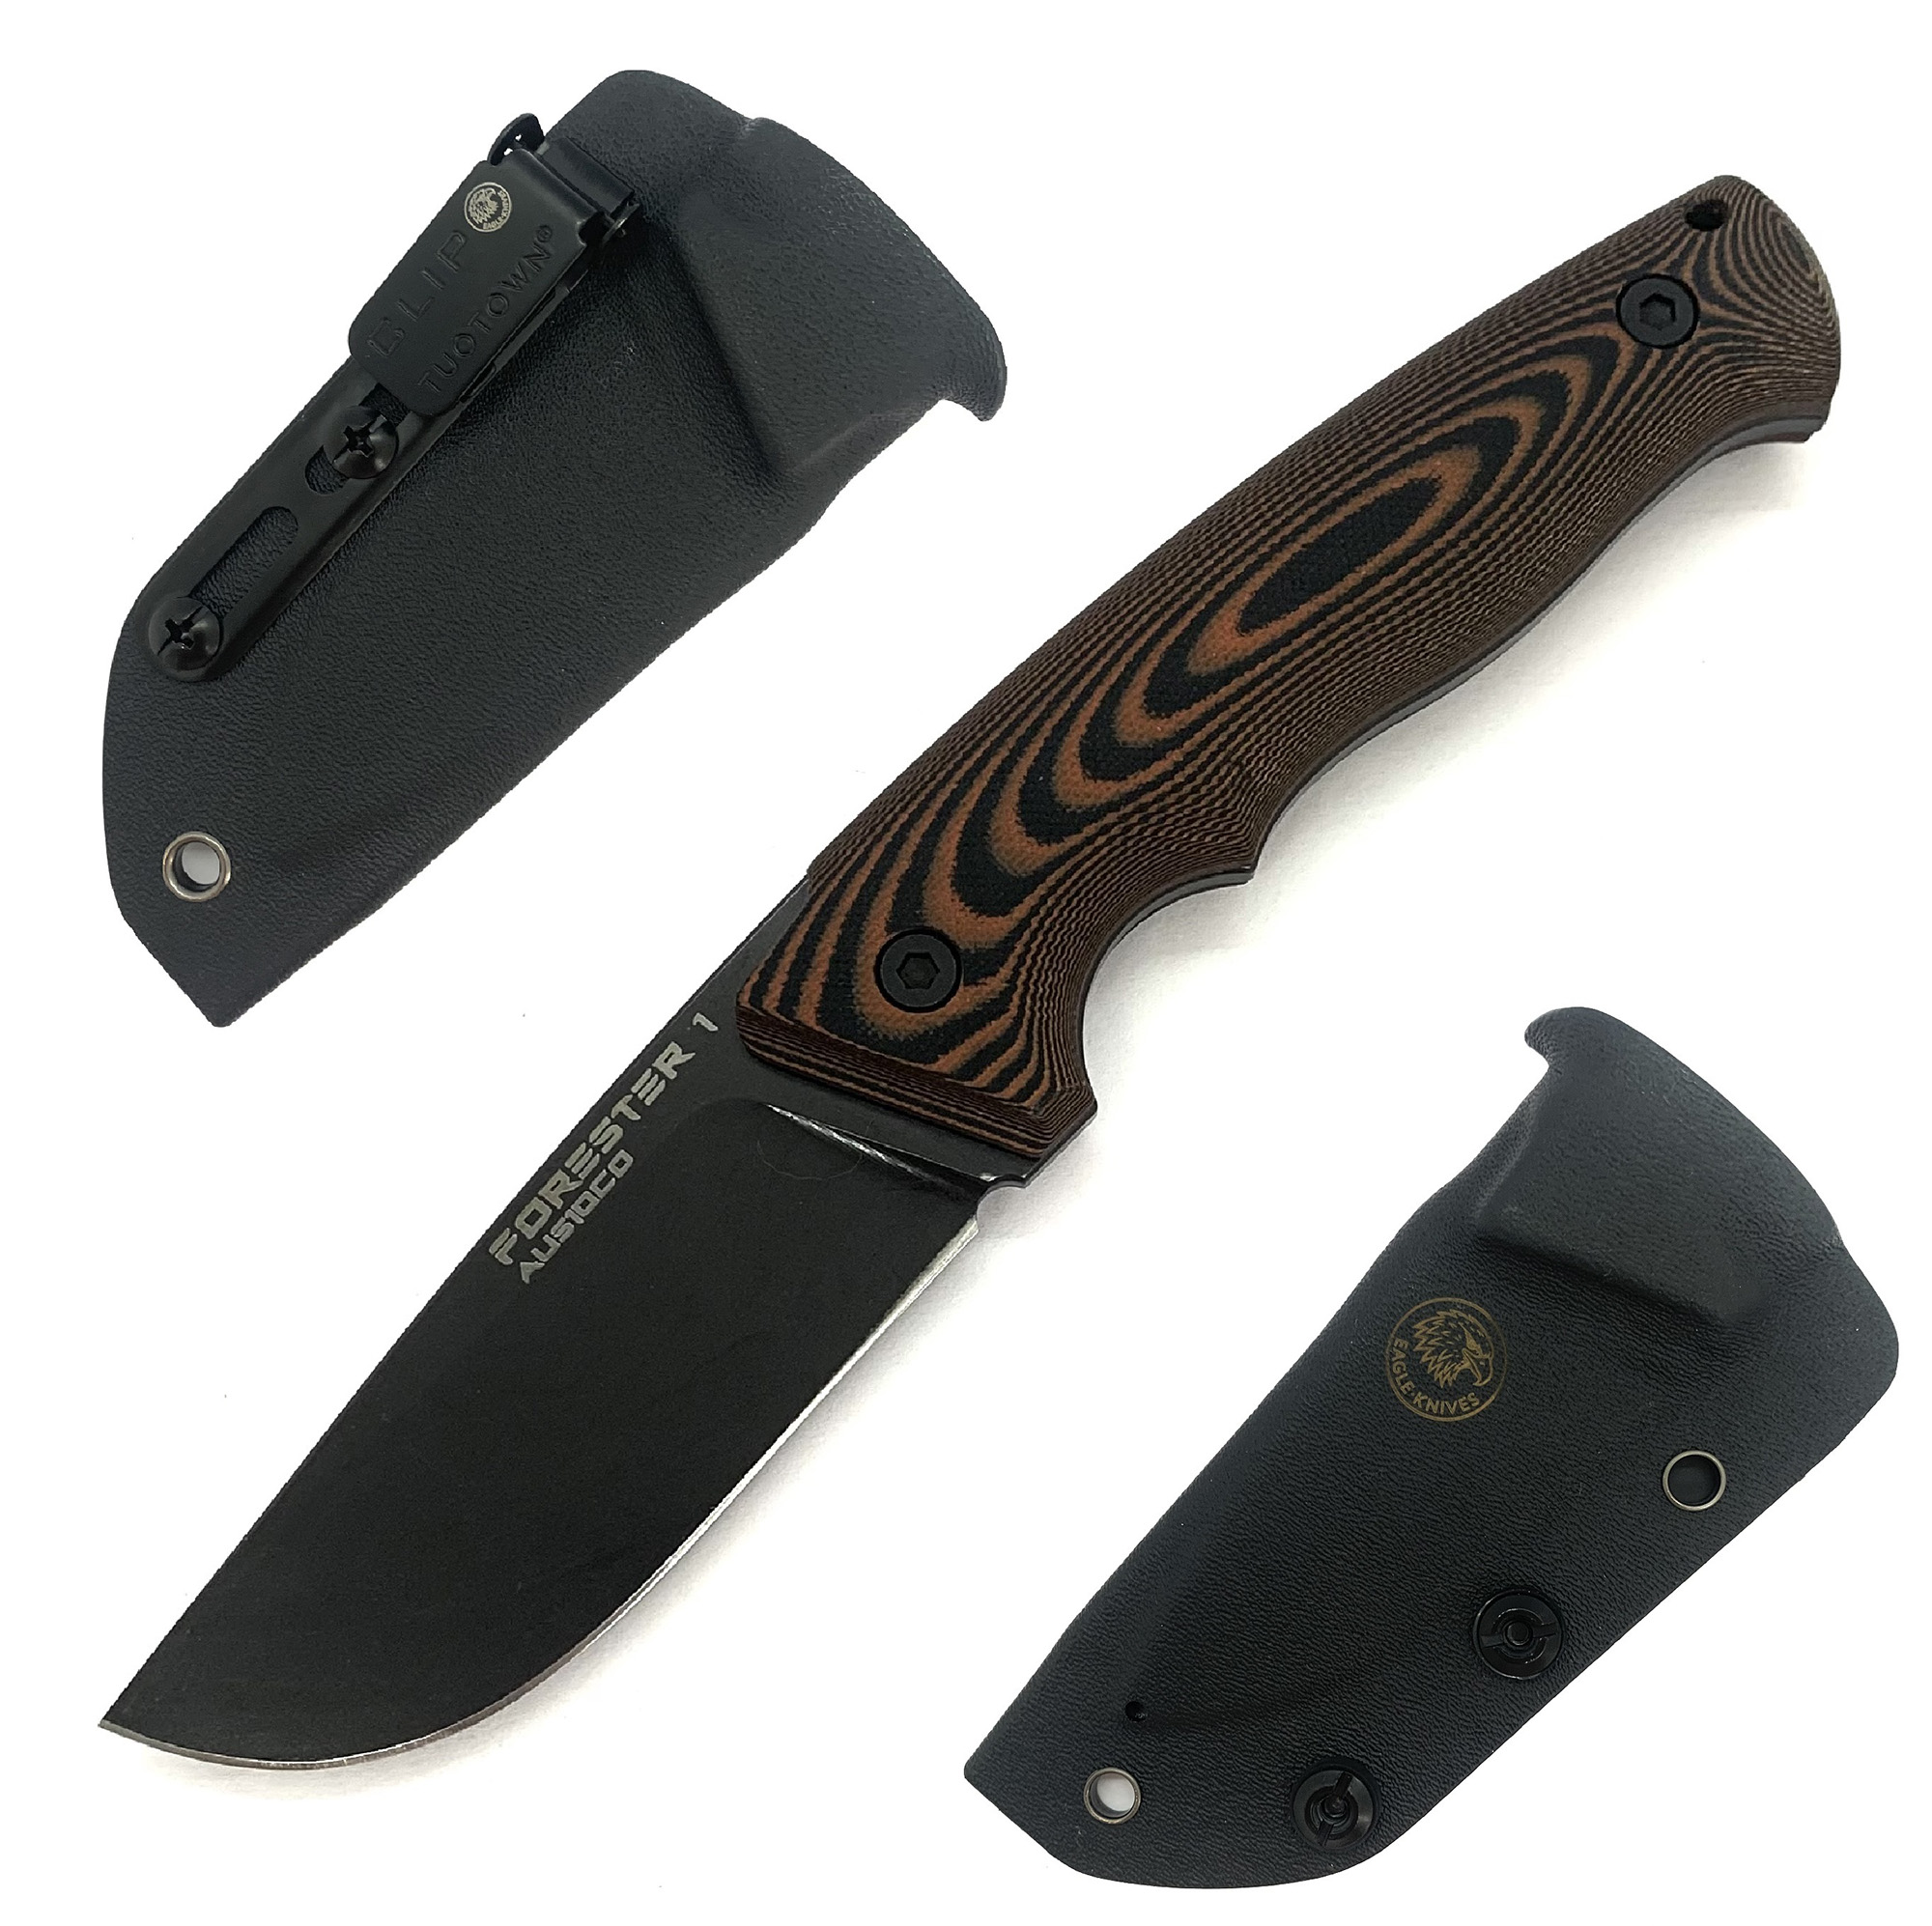  . Eagle Knives Forester 1 AUS10Co .  